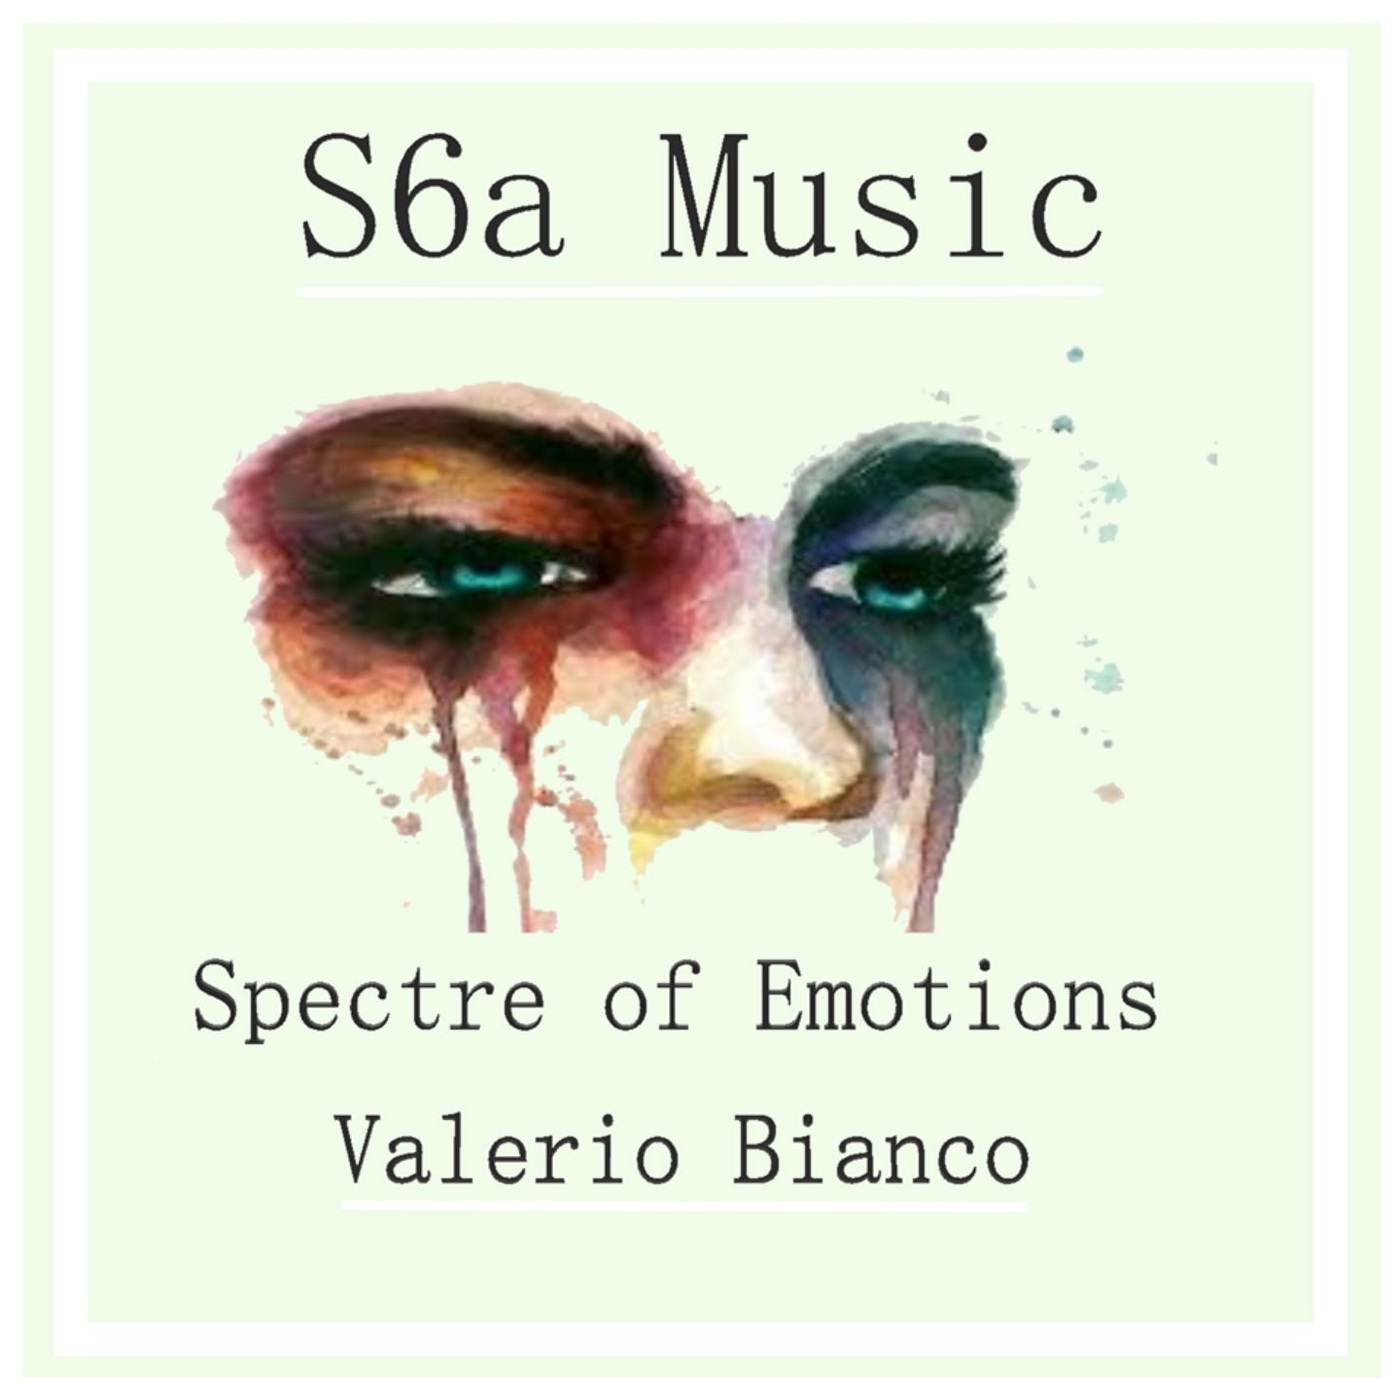 Valerio Bianco - Spectre of Emotions / S6A Music